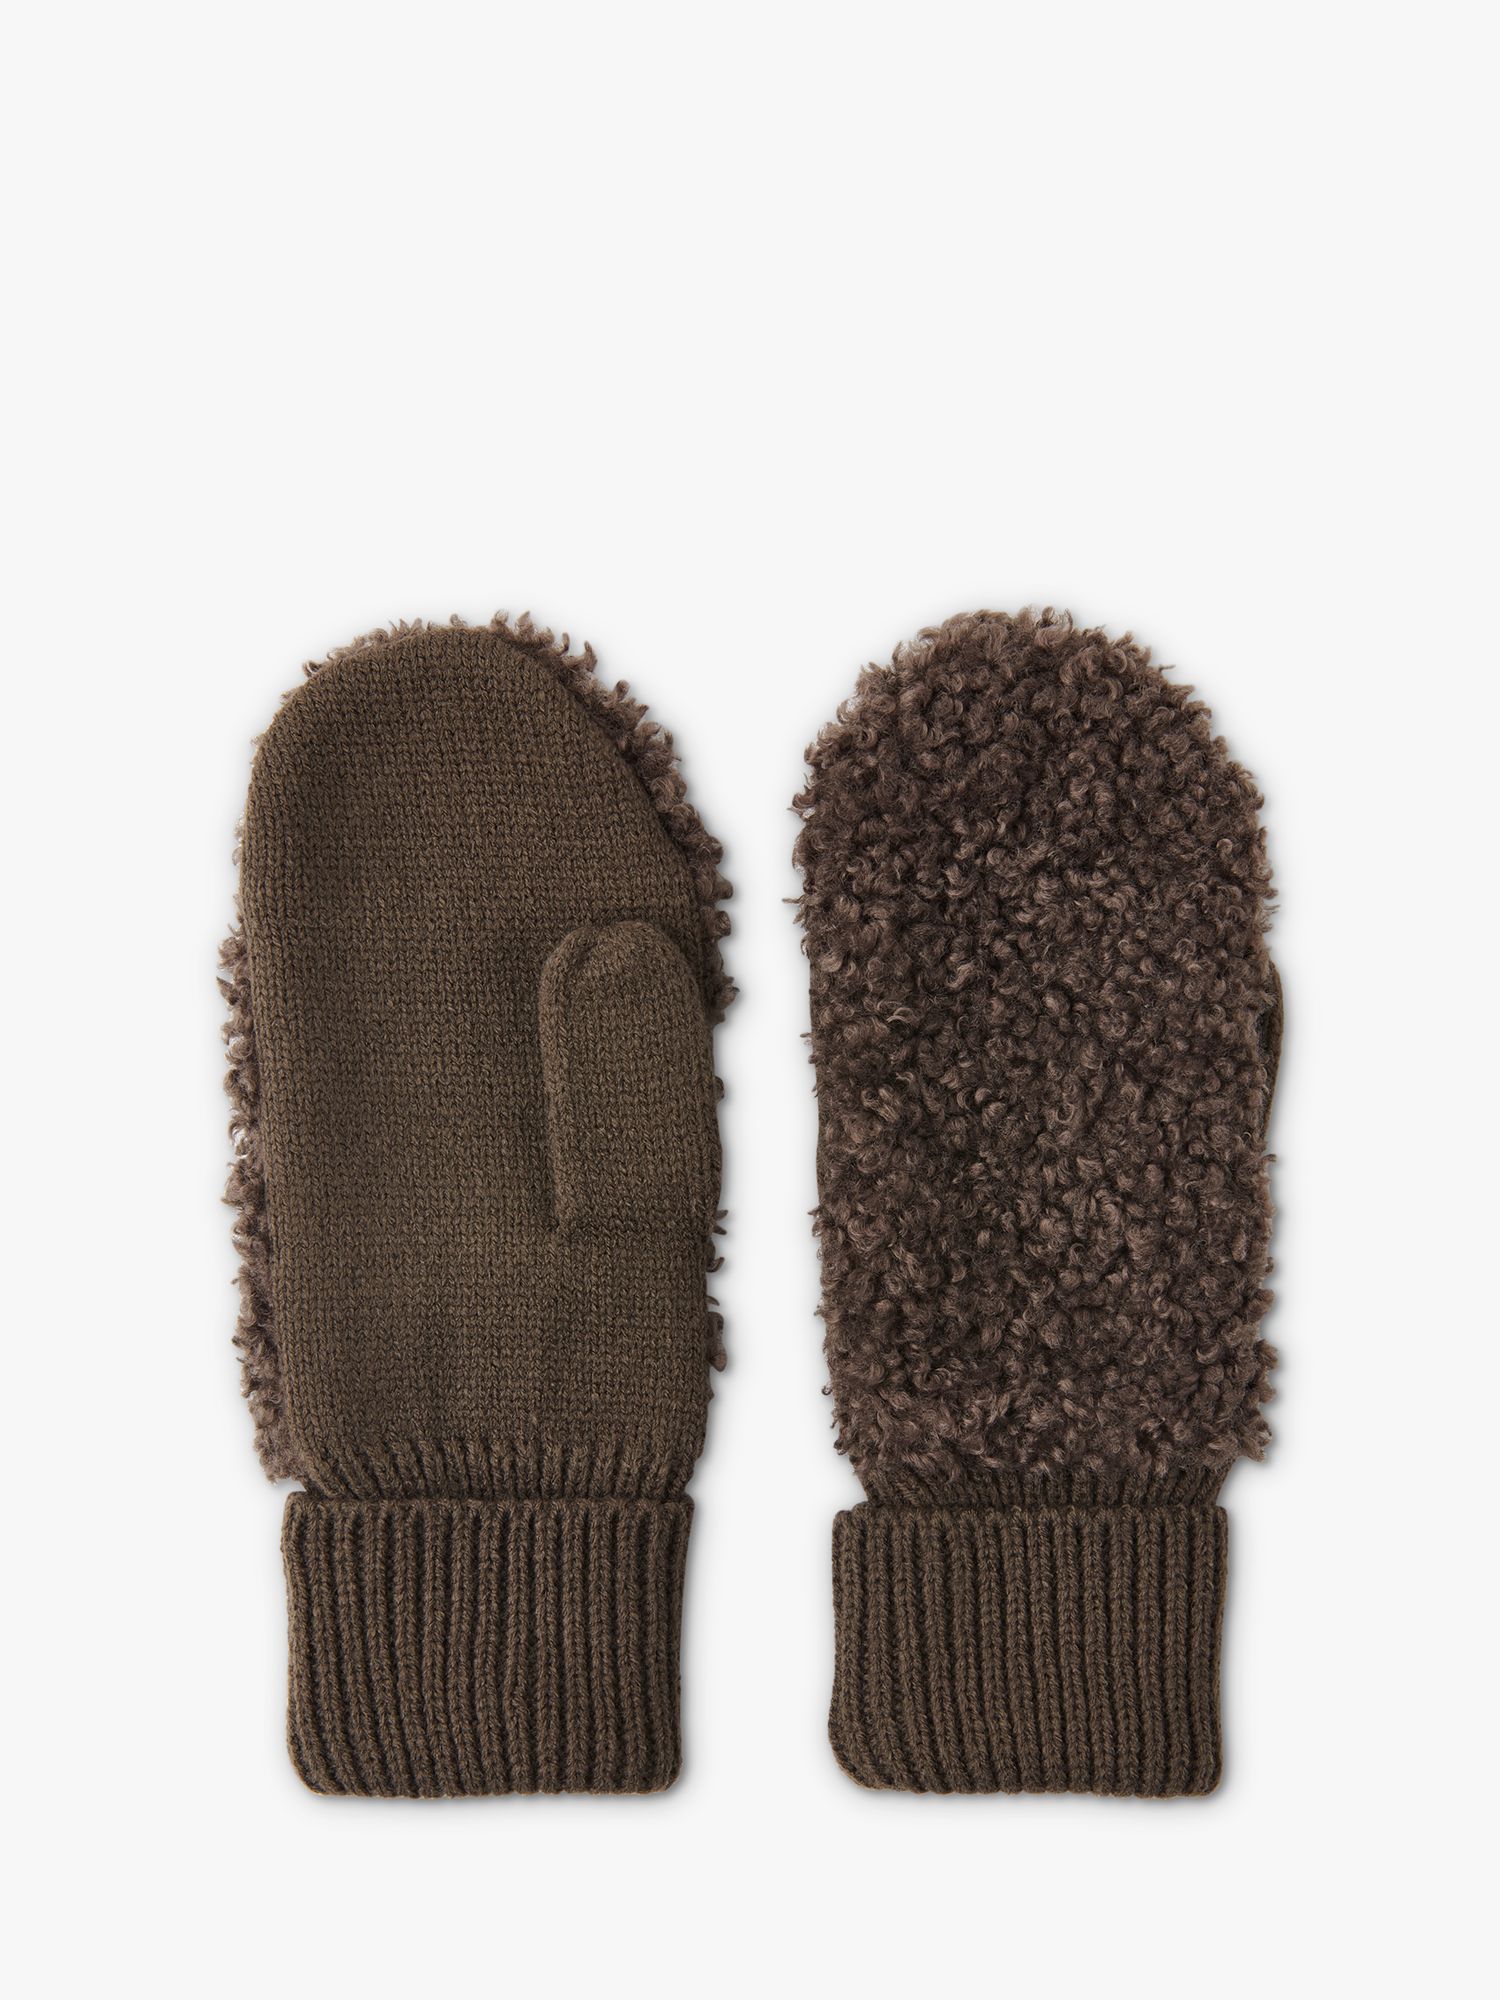 Whistles Borg Front Mittens, Chocolate at John Lewis & Partners